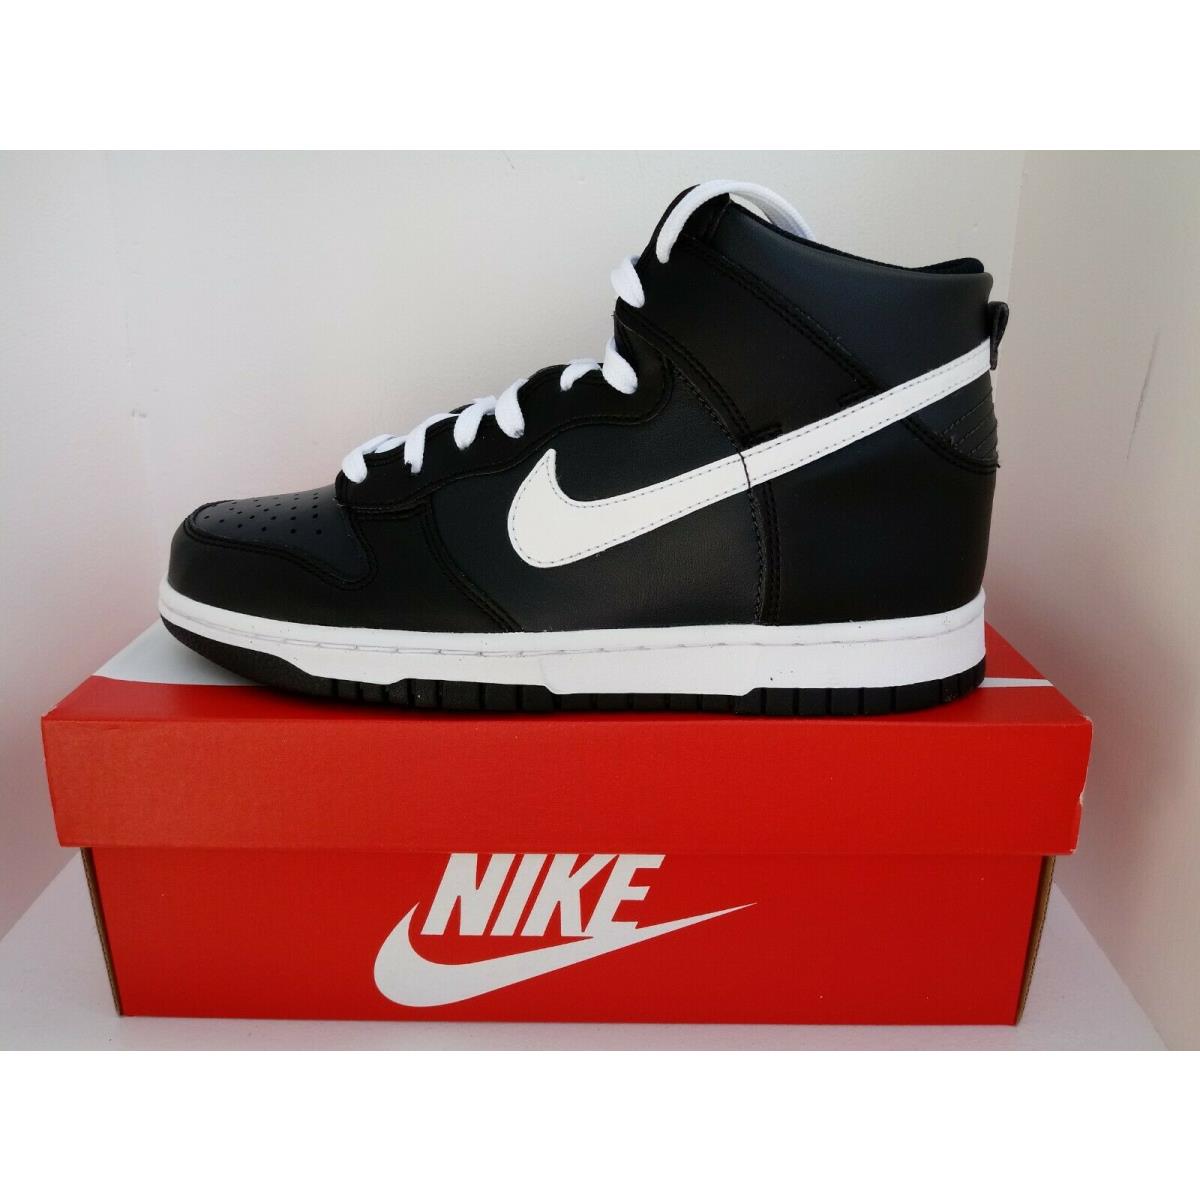 Nike shoes Dunk High - Anthracite/White-Black 8